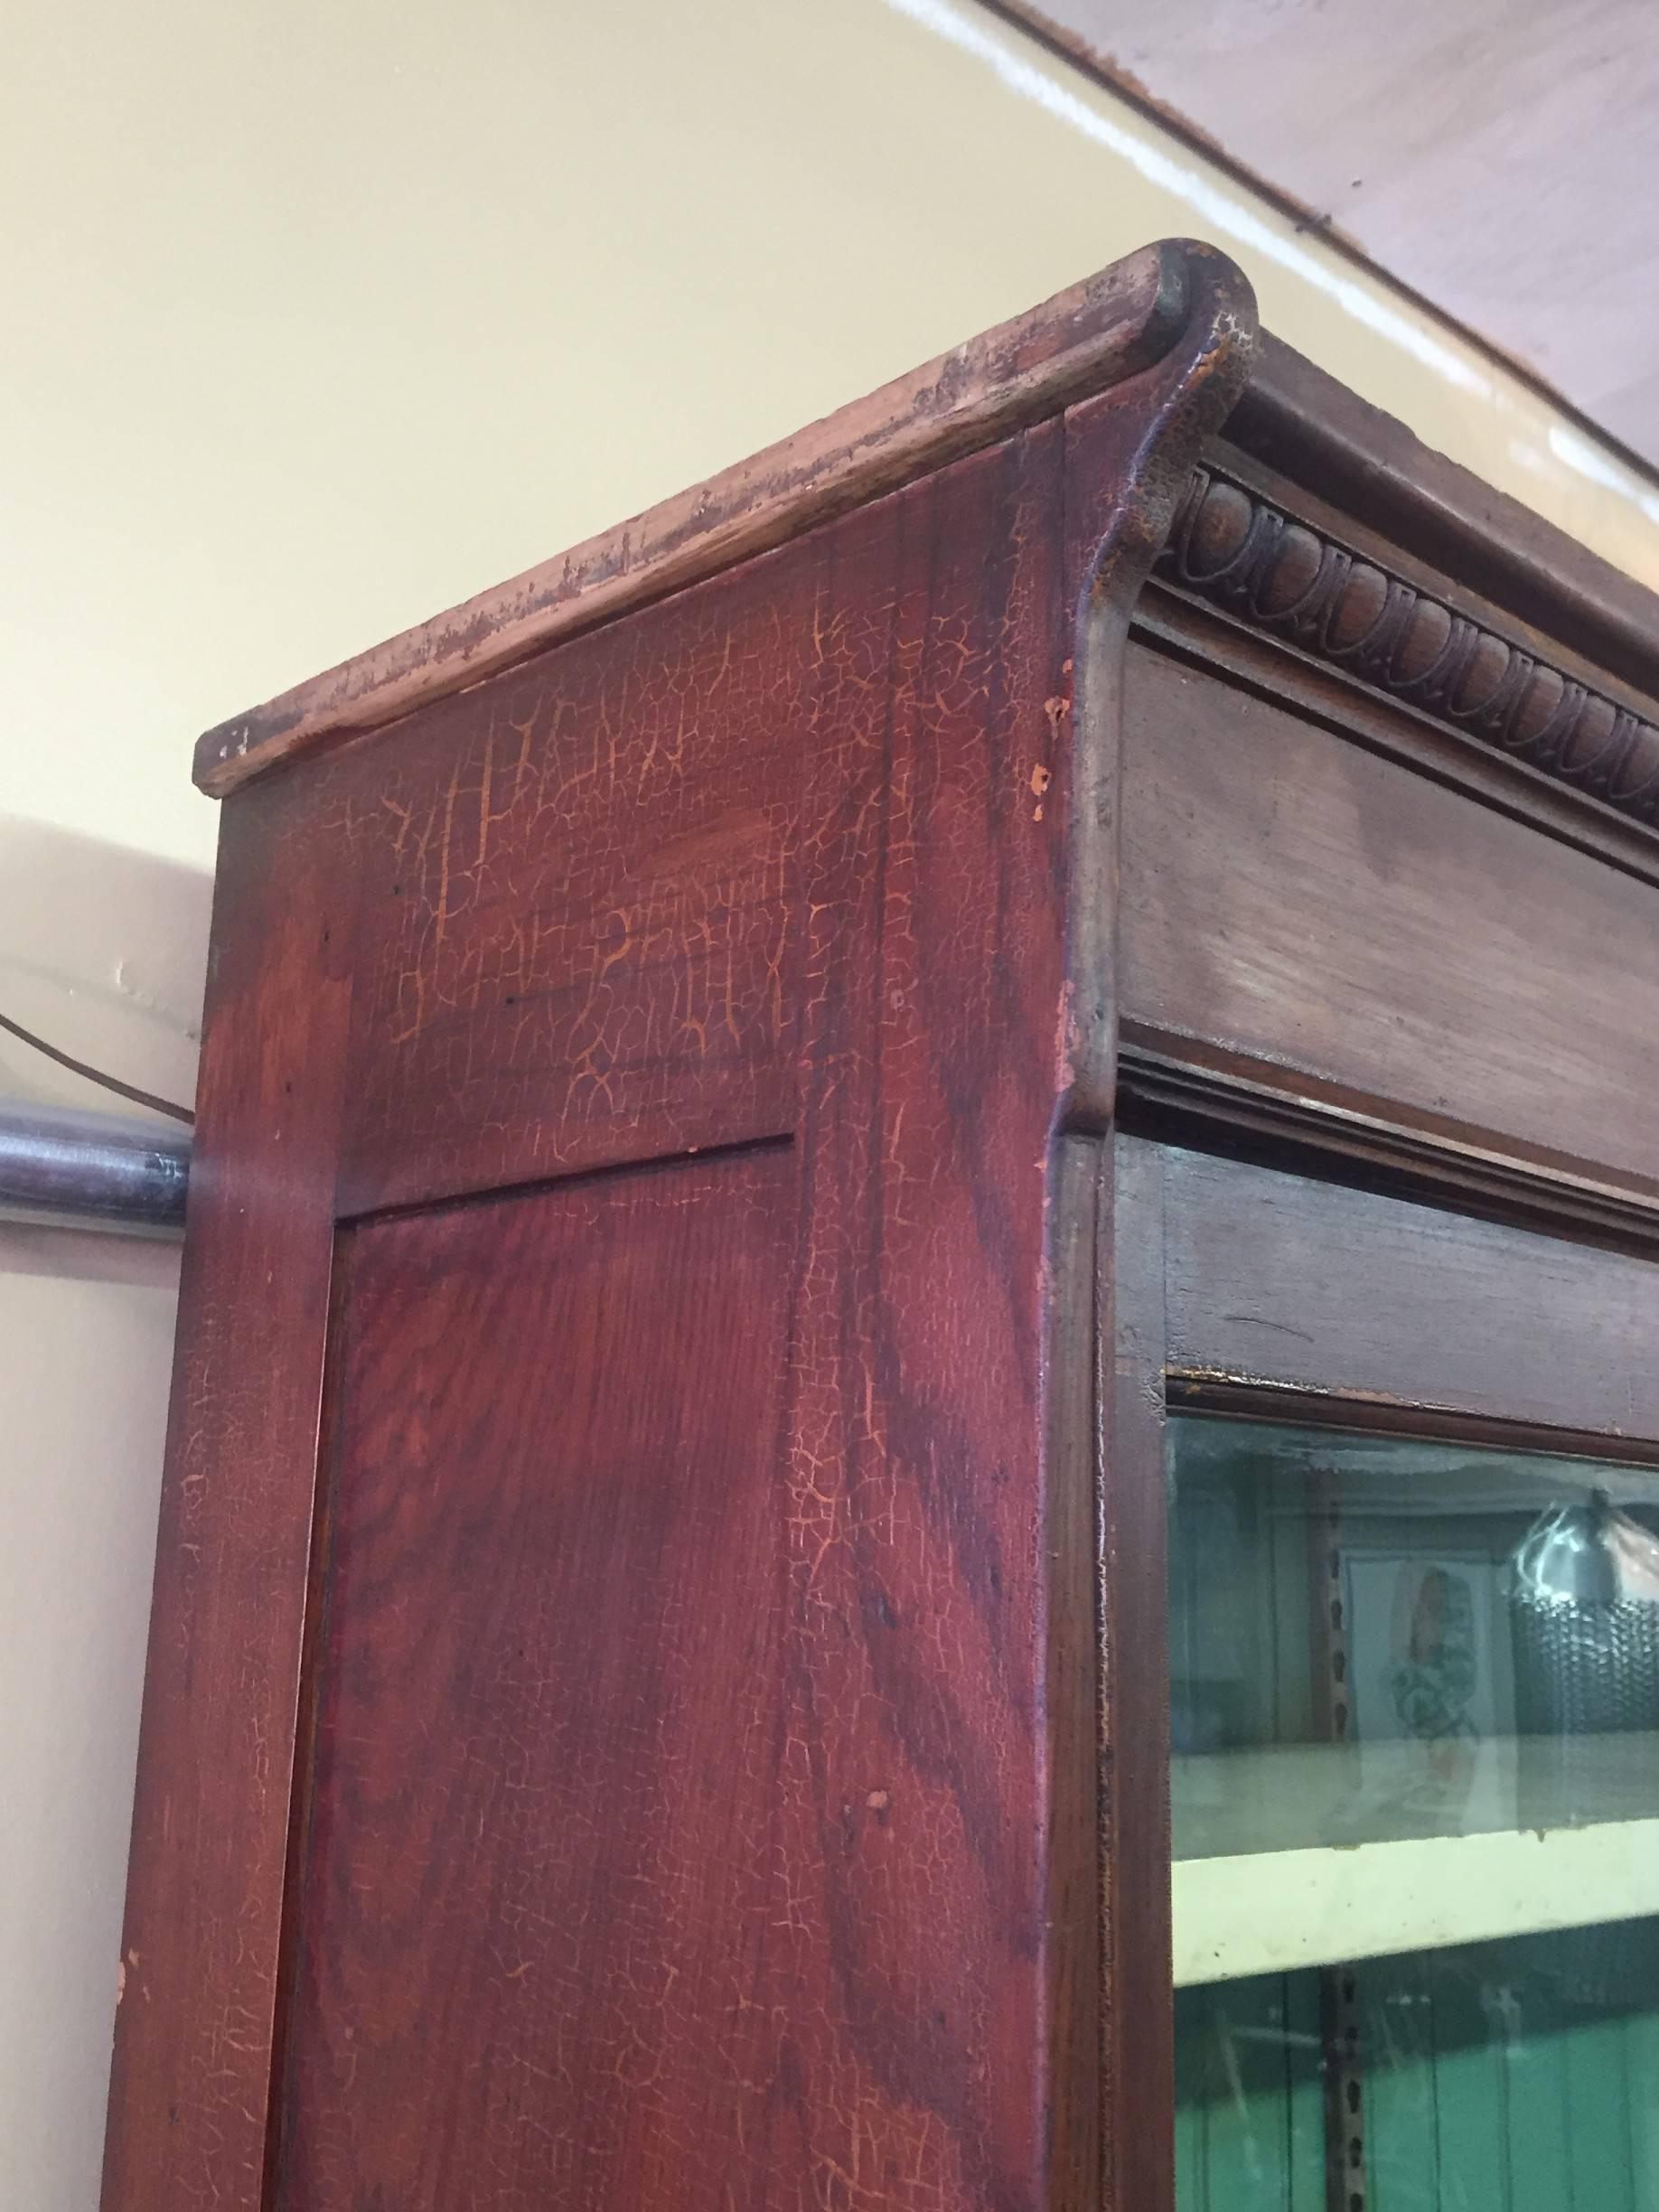 High quality turn of the century country store seed cabinet in oak, manufactured in Chicago by J.D. Warren, with lower shelving via sliding doors, 20 small seed drawers, and three upper shelves via original glass sliding doors.